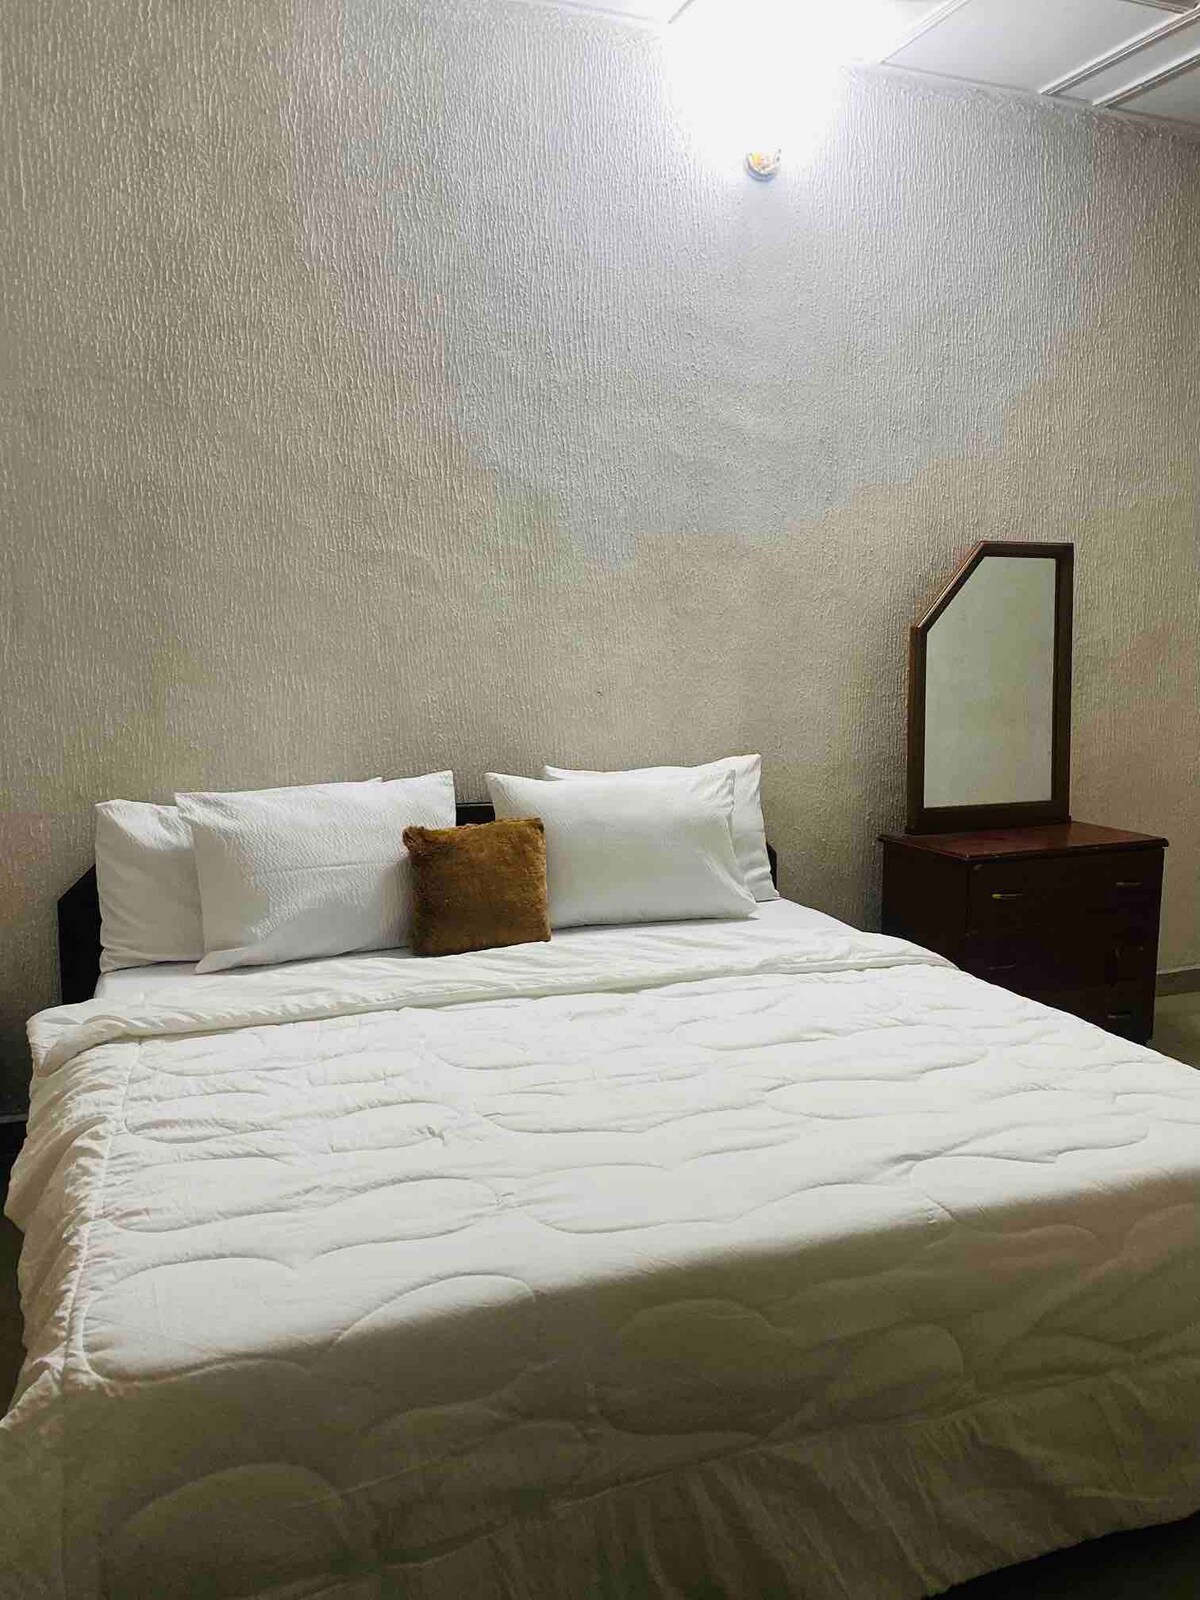 Serviced Guest Room (White Room)